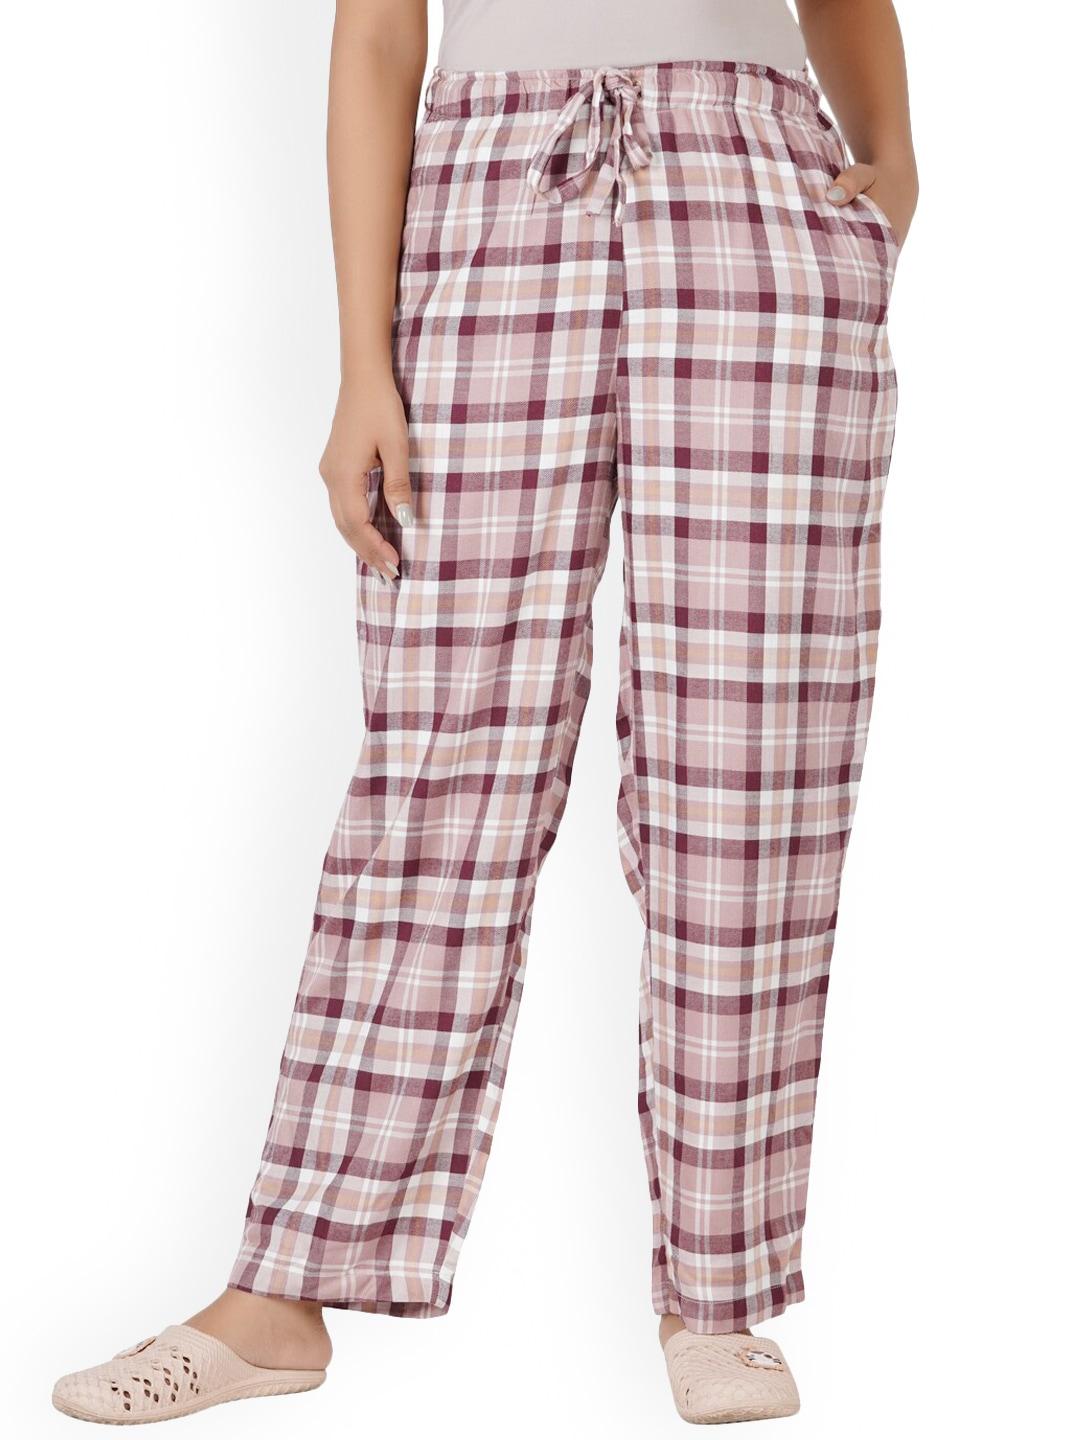 style shoes women maroon & pink checked lounge pants